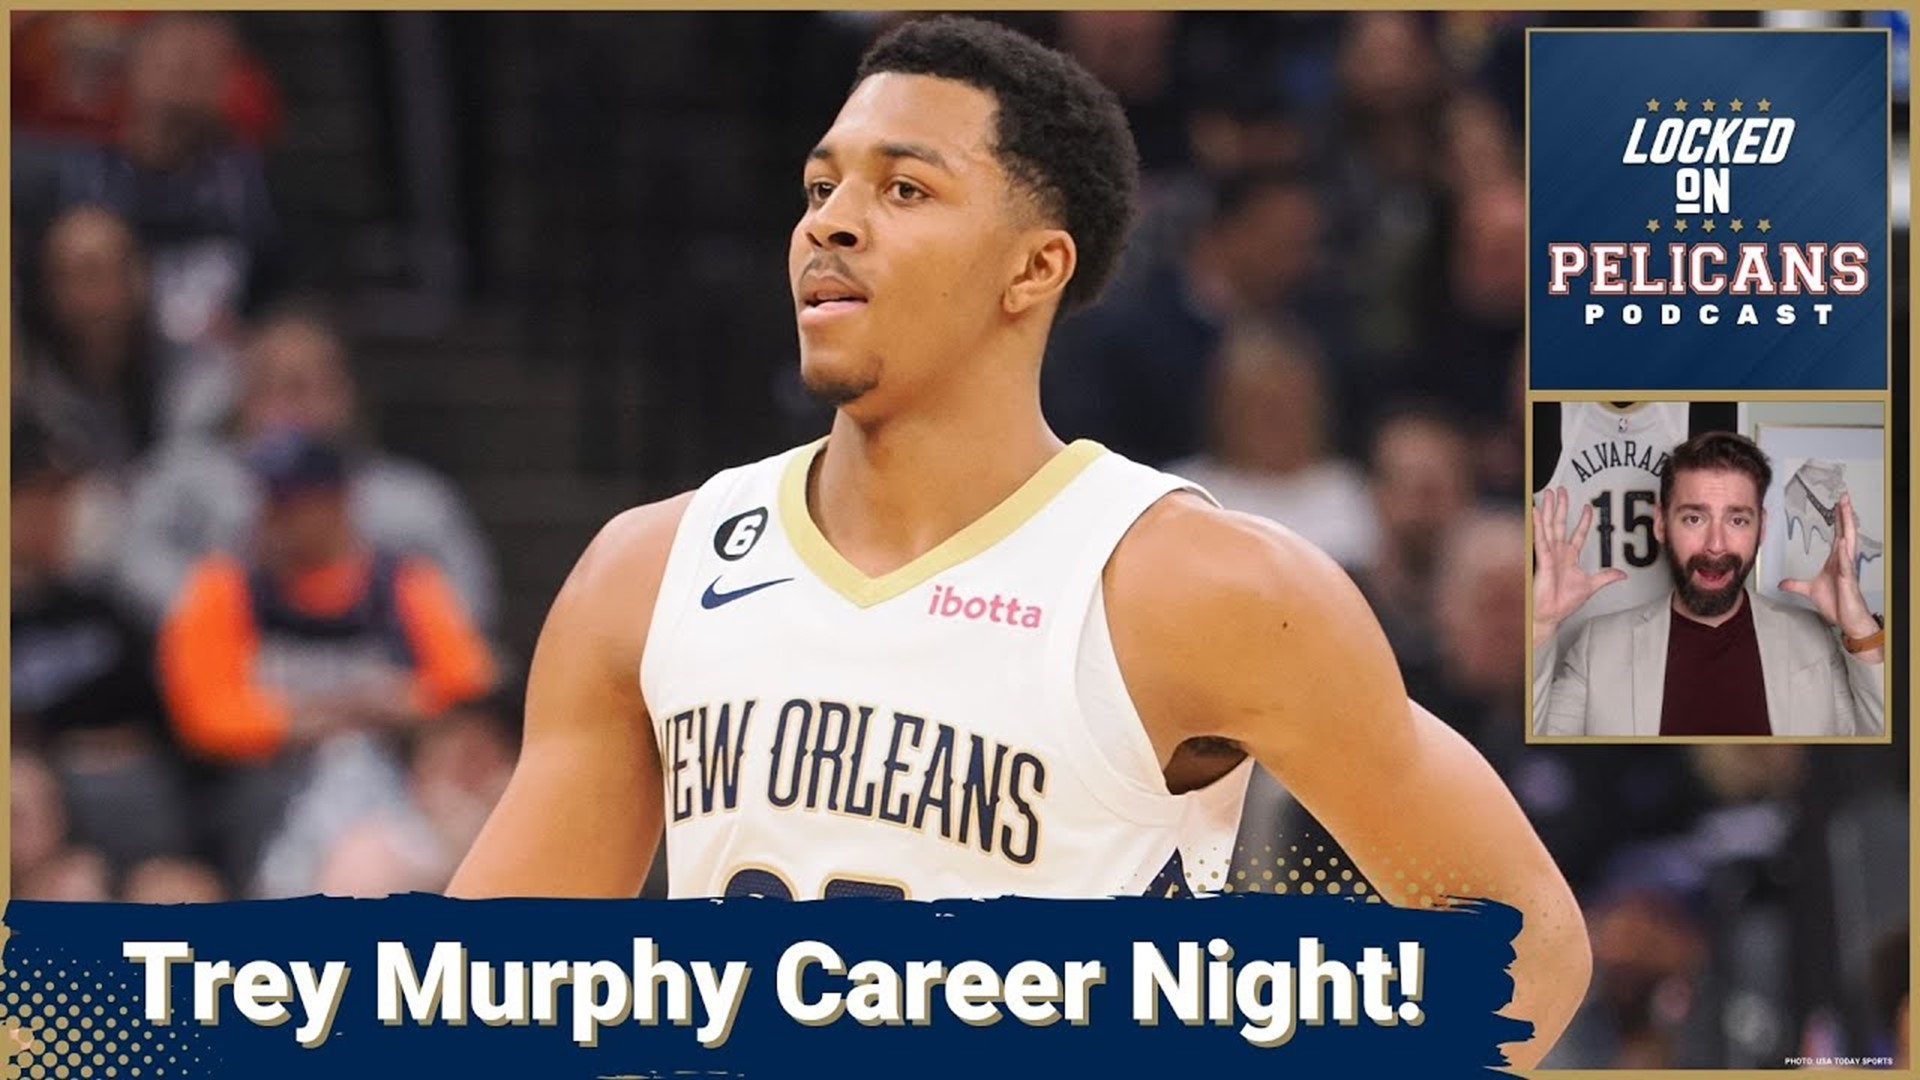 Trey Murphy III gave the New Orleans Pelicans a much needed win with a career high 41 points including 9 made threes.